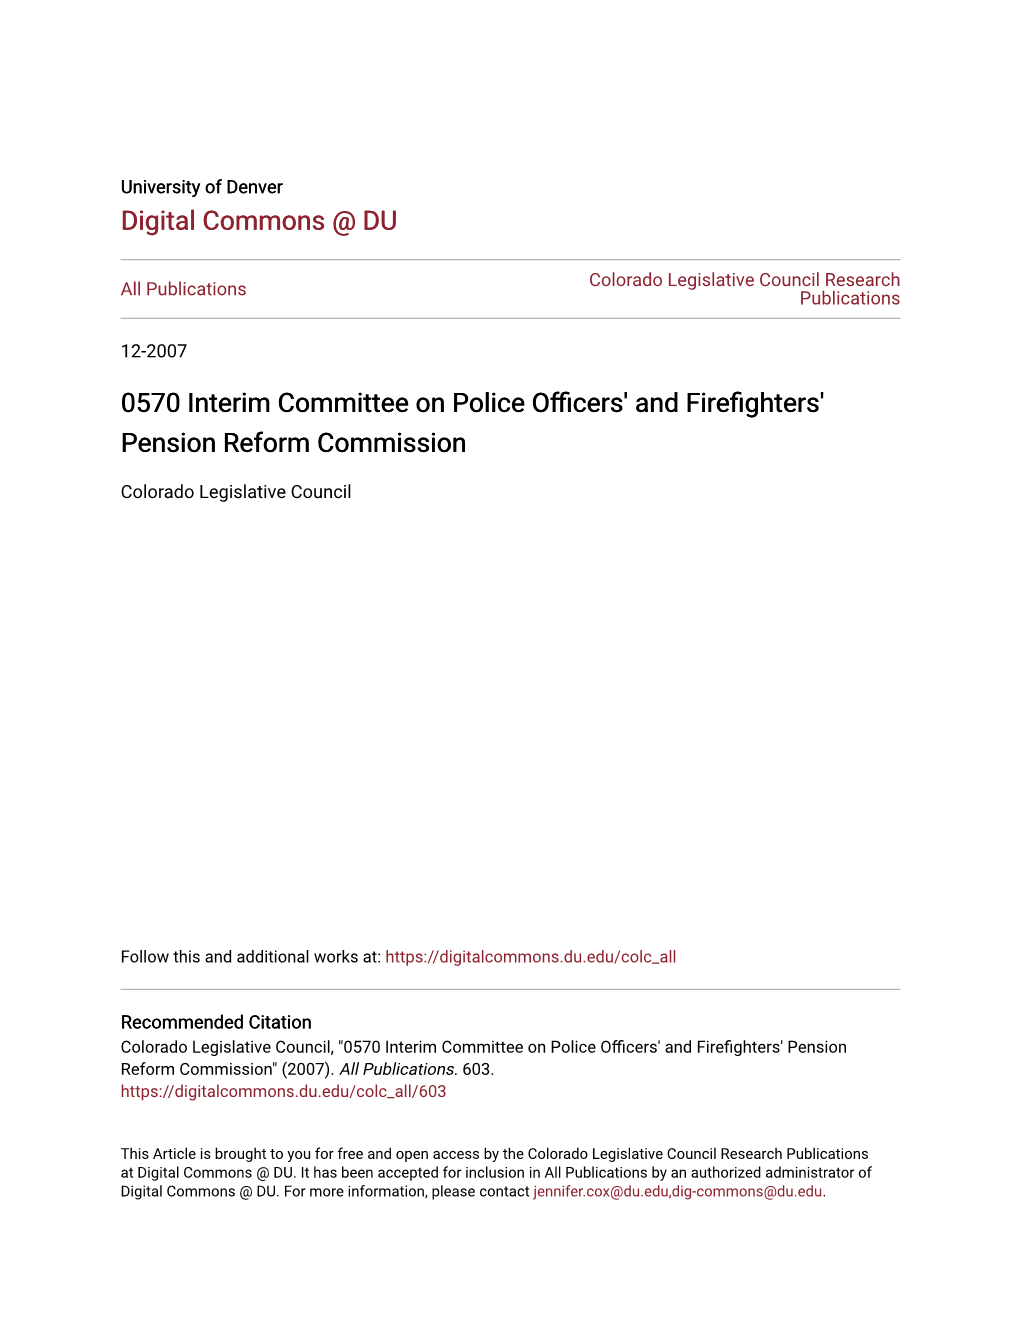 0570 Interim Committee on Police Officers' and Firefighters' Pension Reform Commission